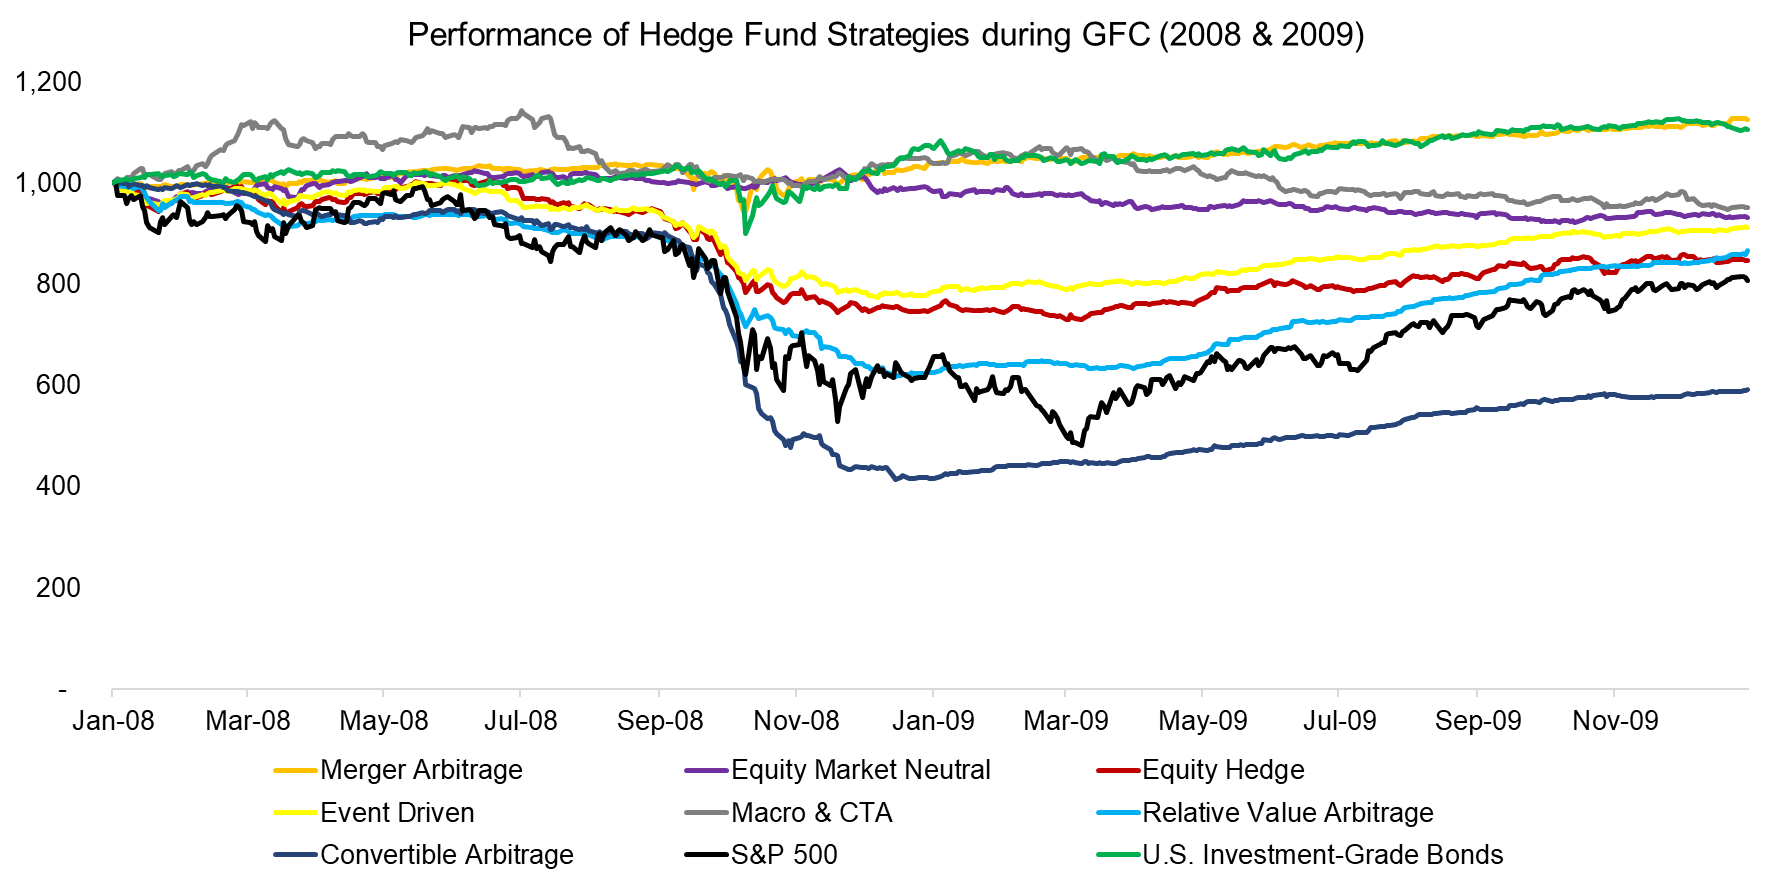 Performance of Hedge Fund Strategies during GFC (2008 & 2009)